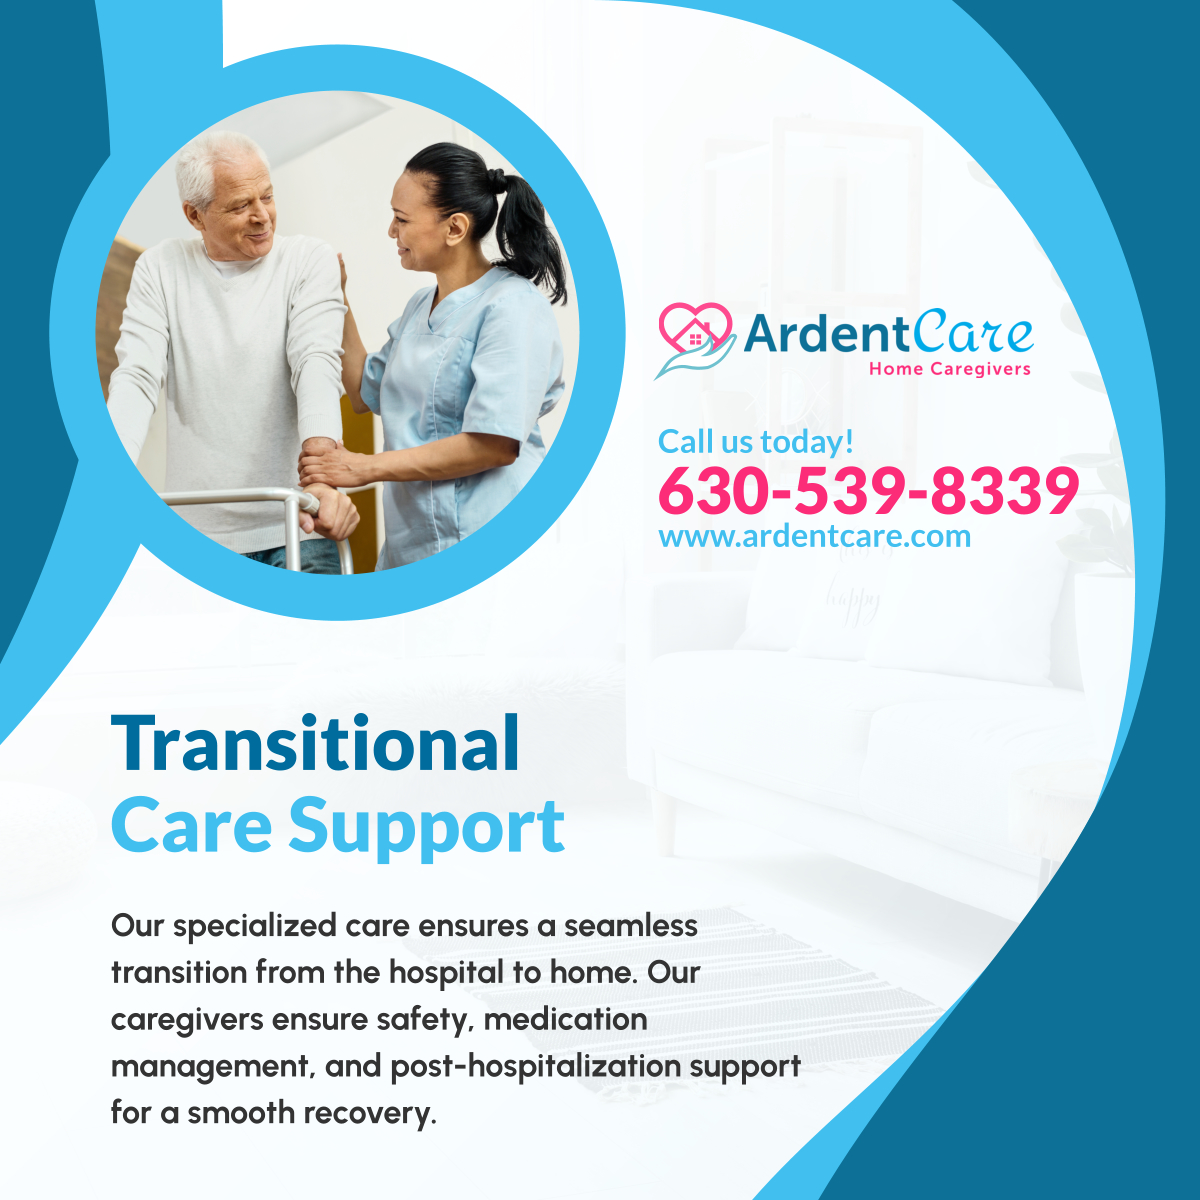 Experience a smooth transition from hospital to home with our expert caregivers. Contact us for compassionate support! 

#BloomingdaleIL #HomeCare #TransitionalCare